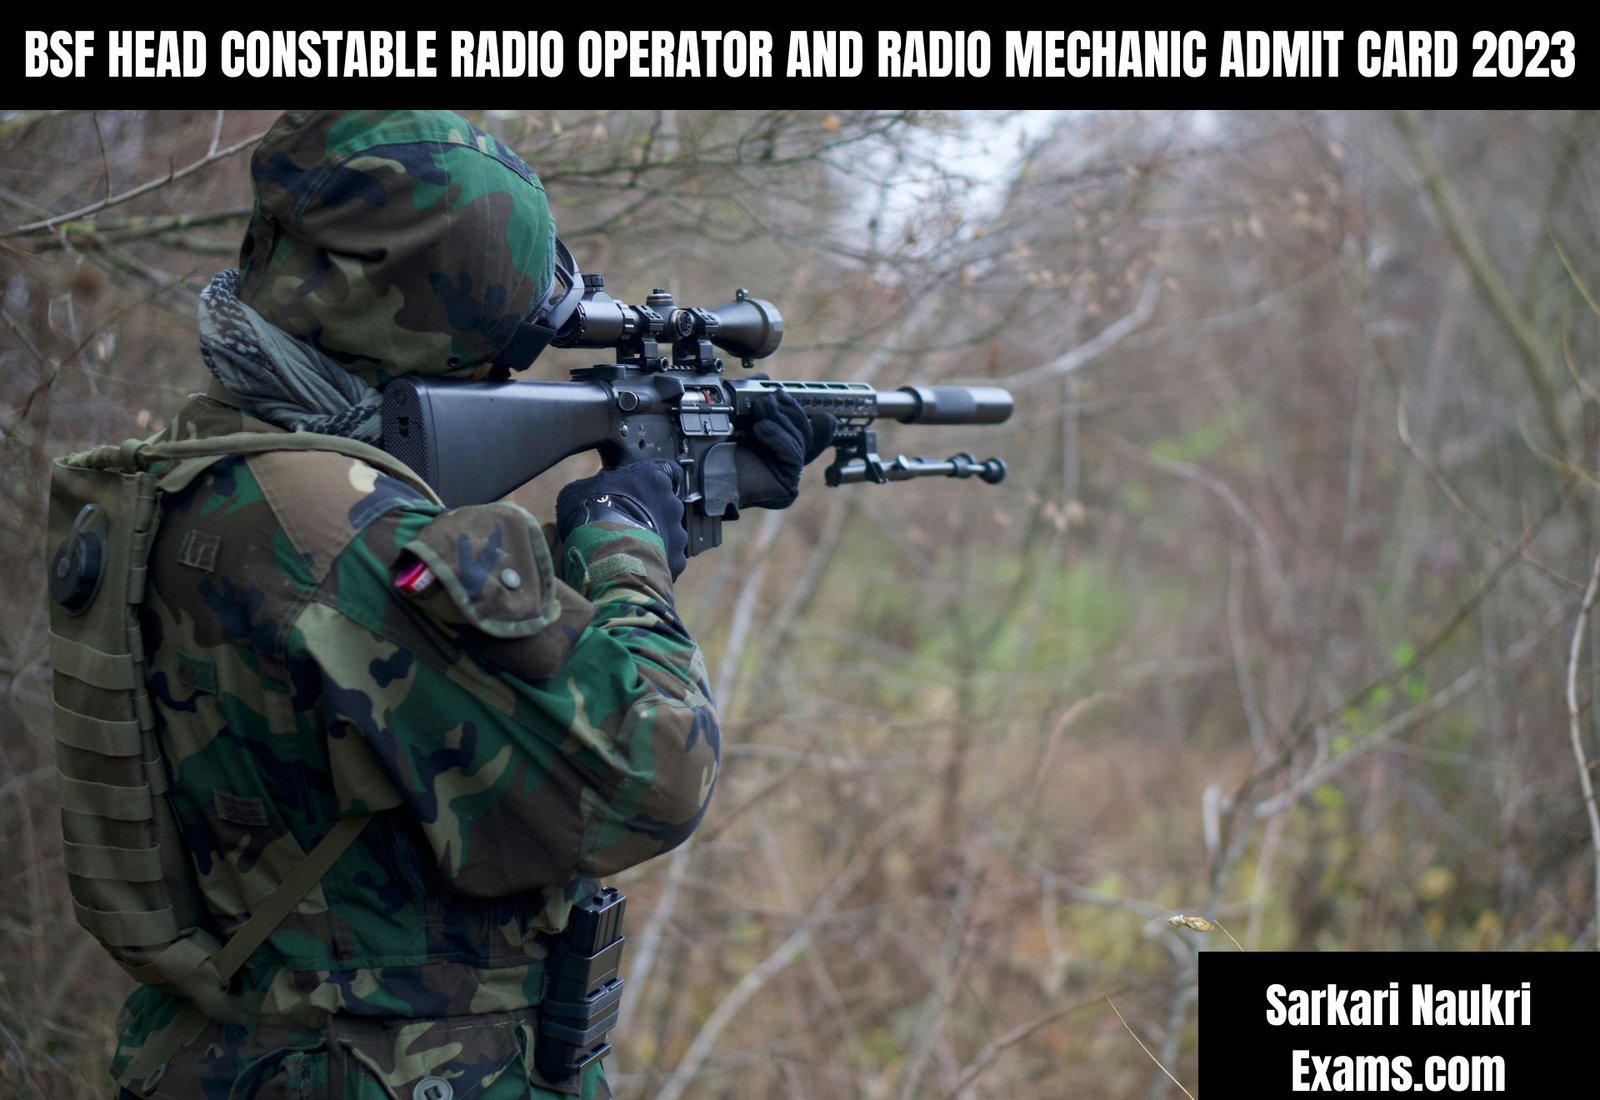 BSF Head Constable Radio Operator and Radio Mechanic Admit Card 2023 (OUT) | Download Link, Exam Date